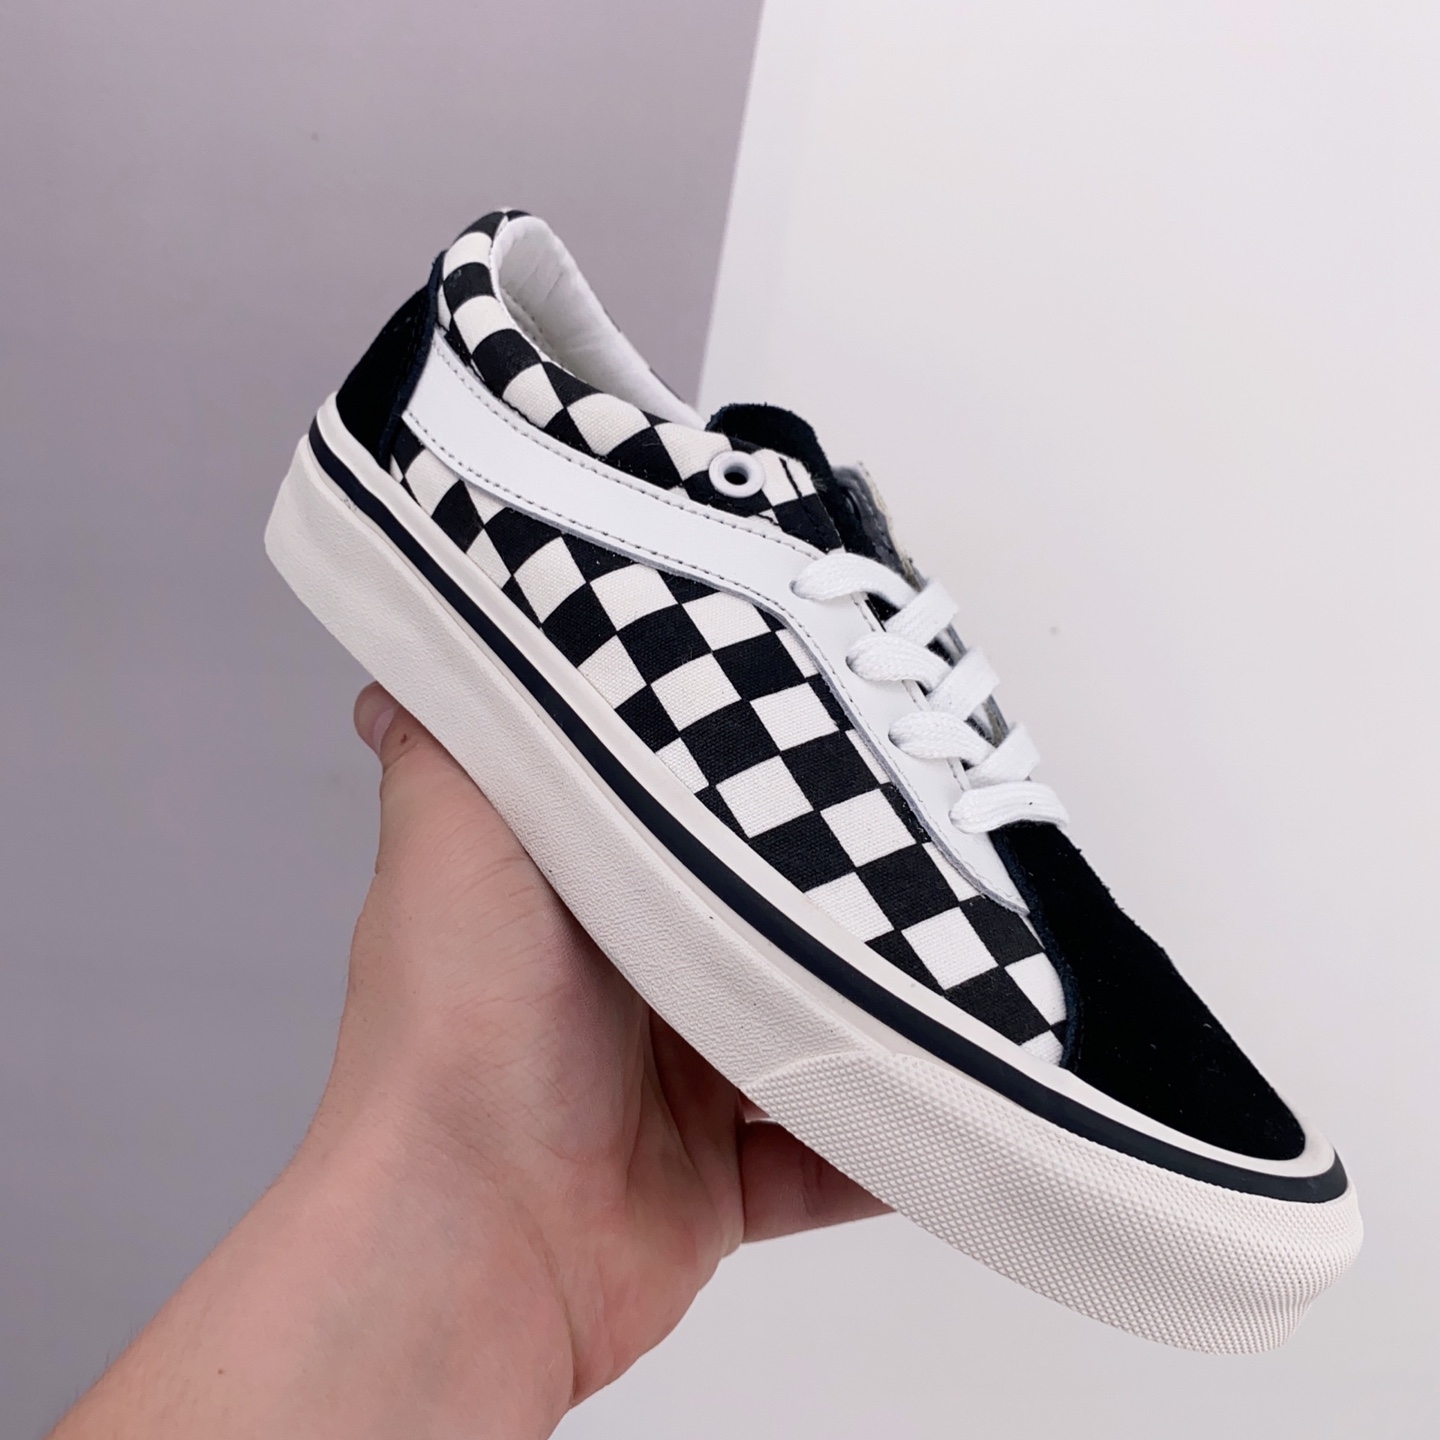 Vans Bold Ni Checkerboard 'Black Marshmallow' - Stylish and Versatile Shoes for Men